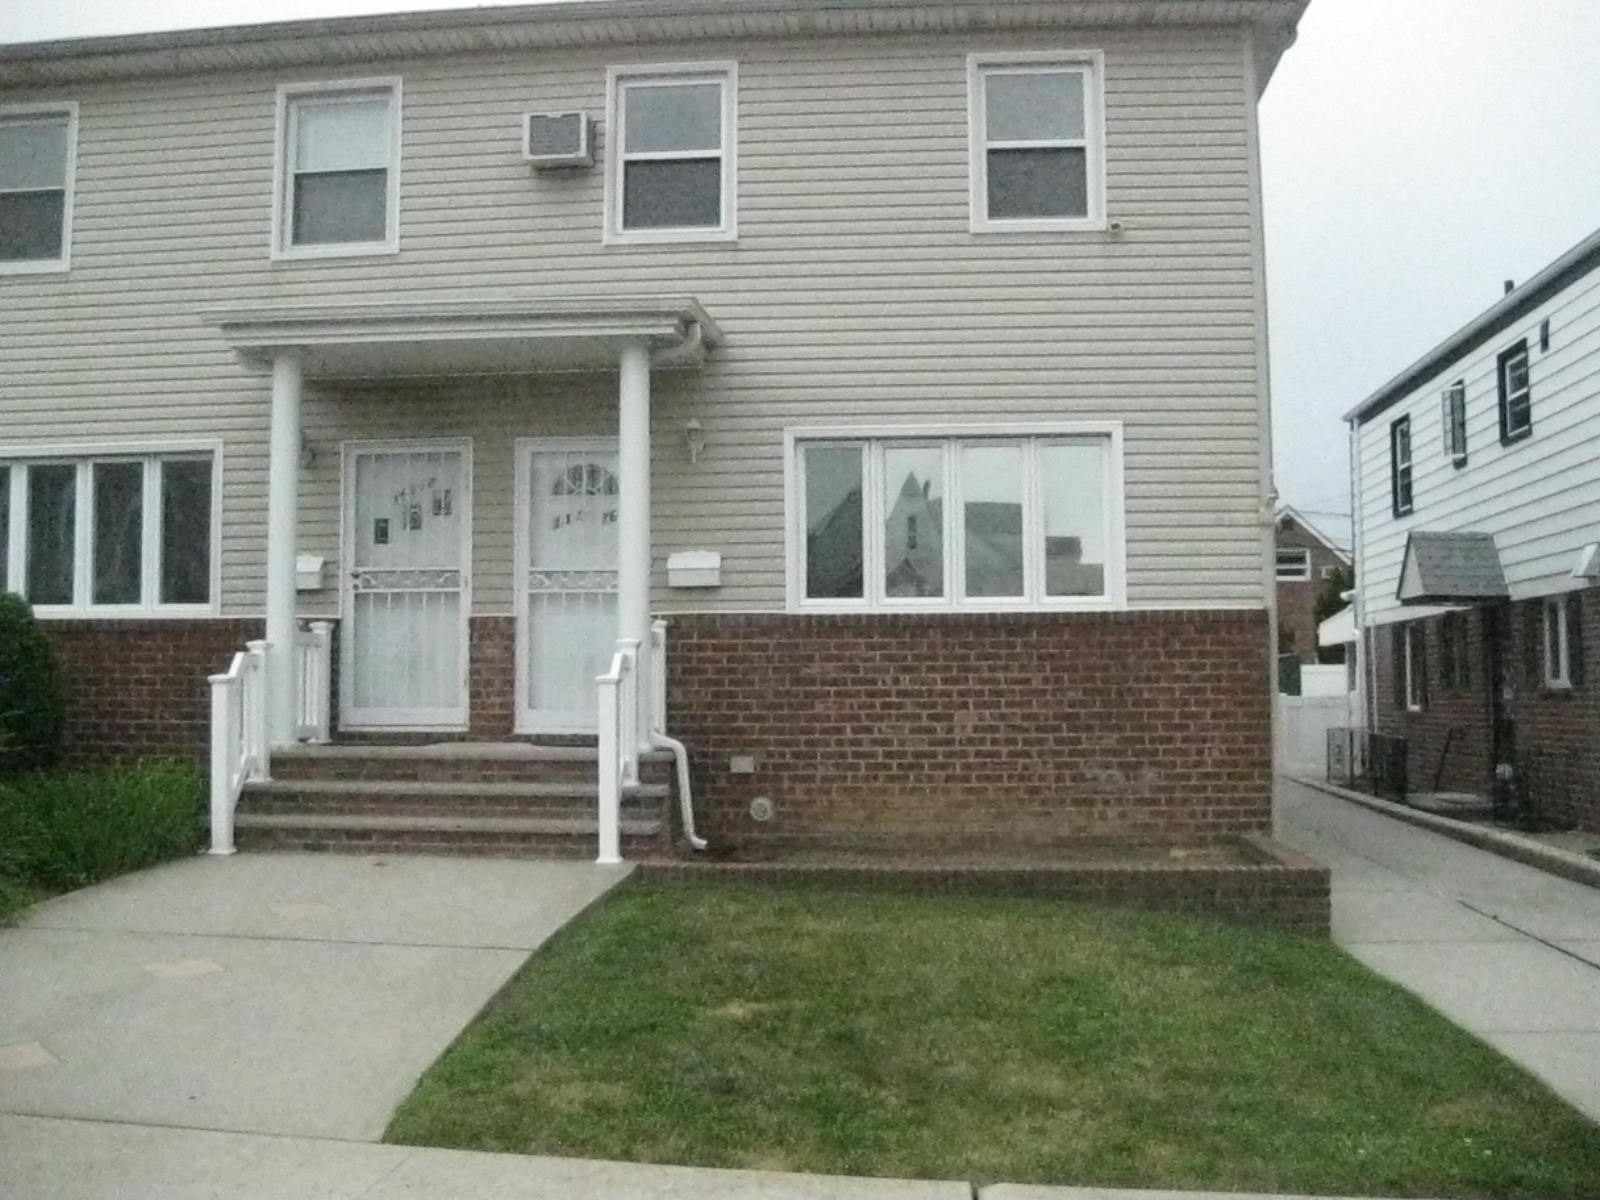  Beautiful 3 Bedroom House For Rent In Whitestone. Features Living Room, Dining Room, Eat-In-Kitchen, 1.5 Baths And Full Finished Basement. Hardwood Flooring Throughout. Dishwasher, Washer And Dryer, Yard Access And Parking Included. Near Public Transportation. House Is In Excellent Condition And In Great Location, A Must See!

